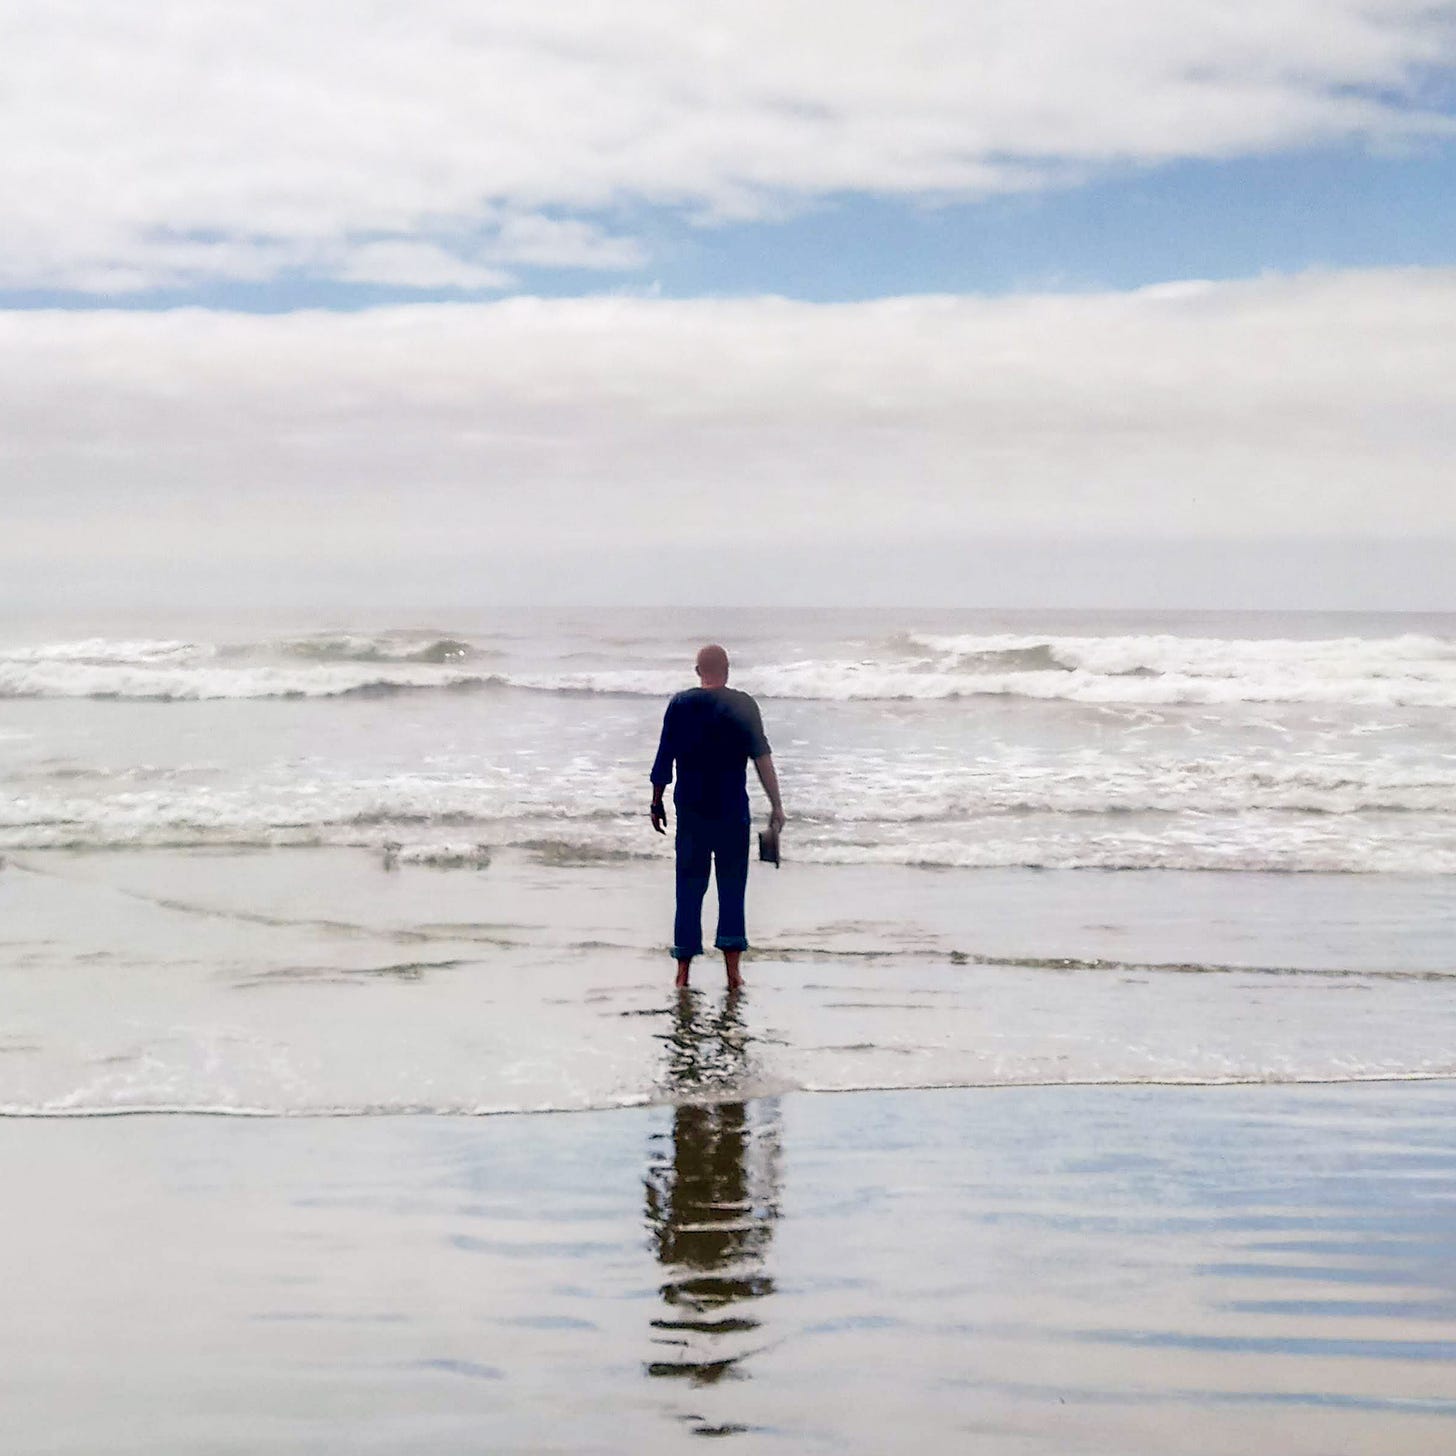 Jeffrey Puukka standing in the surf, looking out at the sea, in article 5 of THOUGHT BUBBLES, by Jeffrey Puukka.